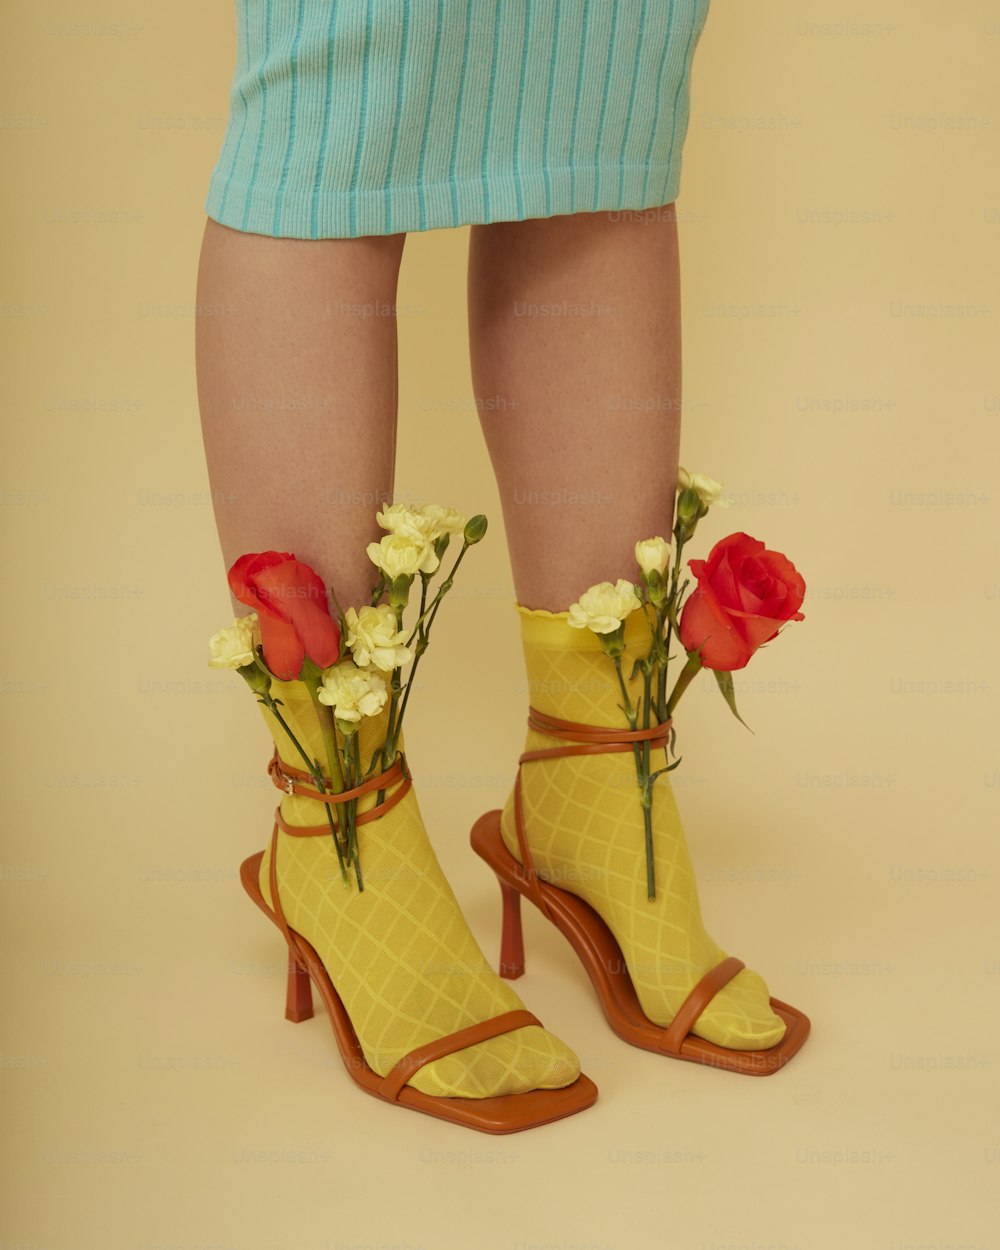 a woman's legs wearing yellow shoes with flowers in them